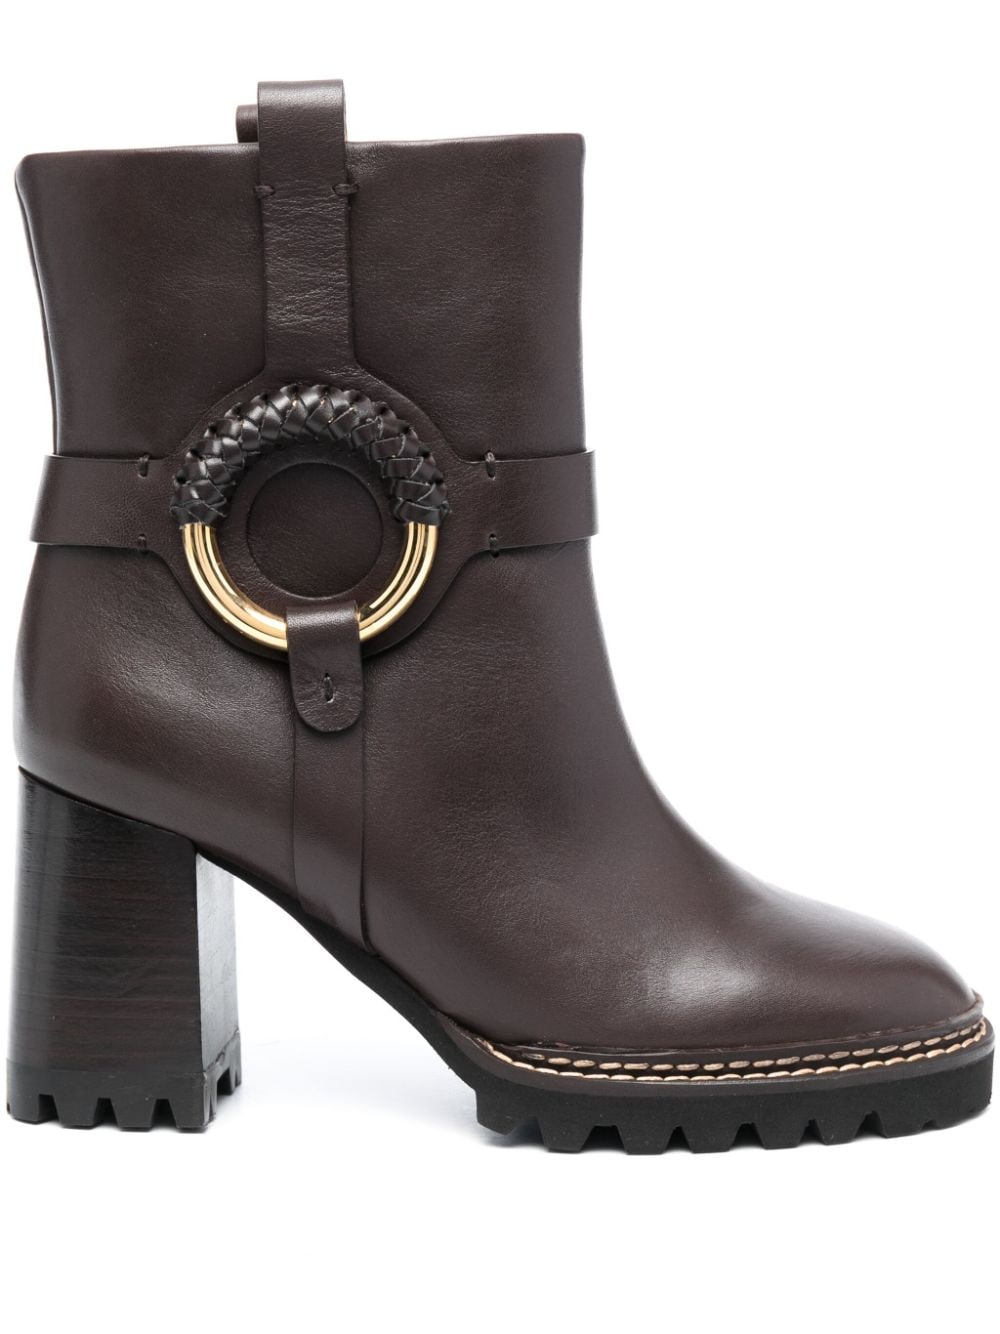 See by Chloé Hanna 80mm platform ankle boots - Brown von See by Chloé